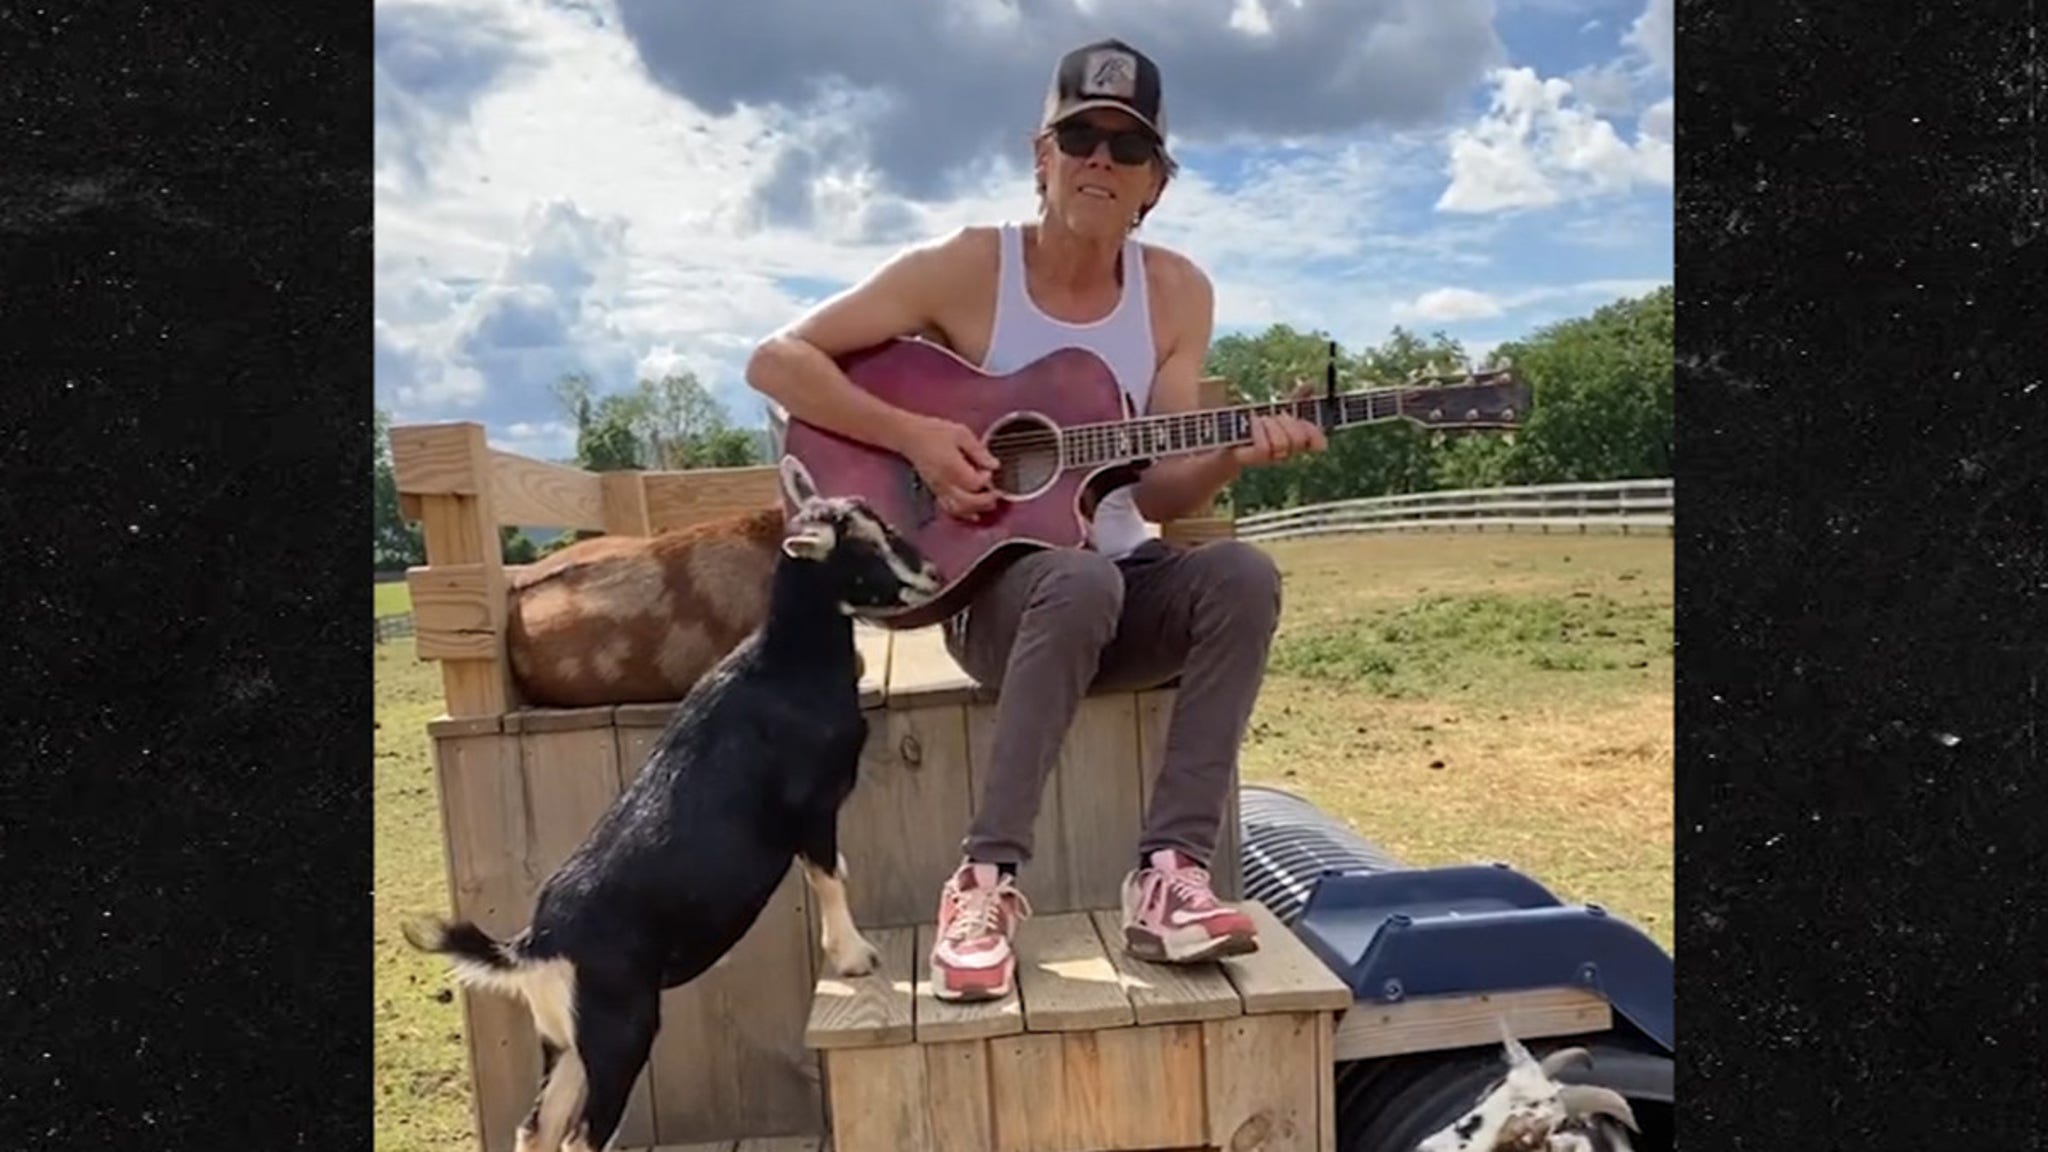 Kevin Bacon Does Guitar Cover of Beyonce’s ‘Heated,’ Help from Goat